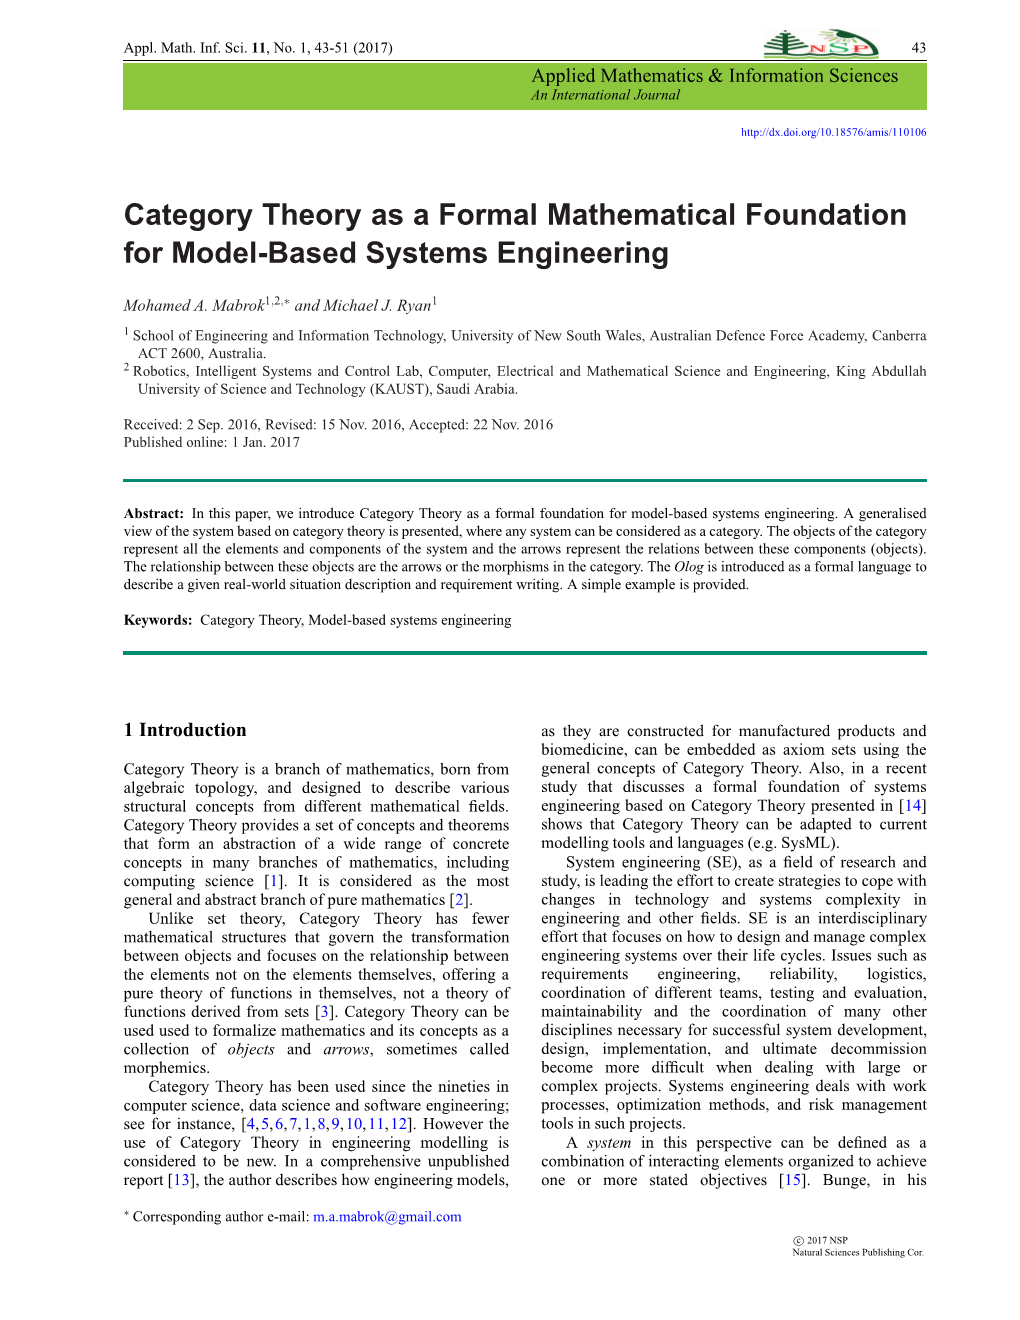 Category Theory As a Formal Mathematical Foundation for Model-Based Systems Engineering